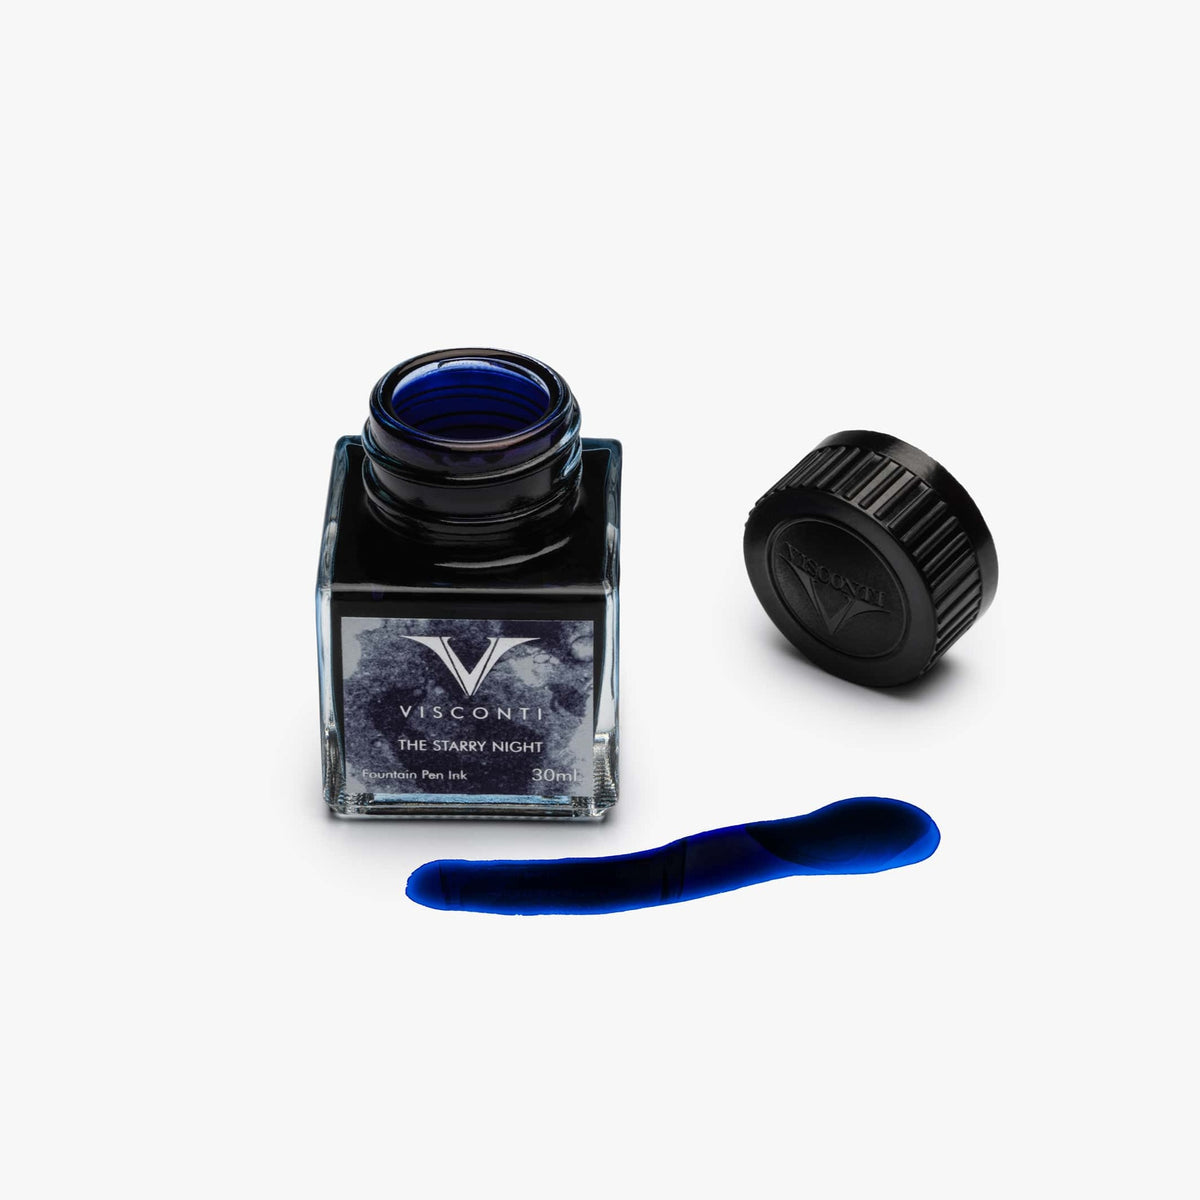 A Coles of London Visconti Van Gogh Starry Night Ink in Deep Blue inspired bottle of ink with a blue lid.